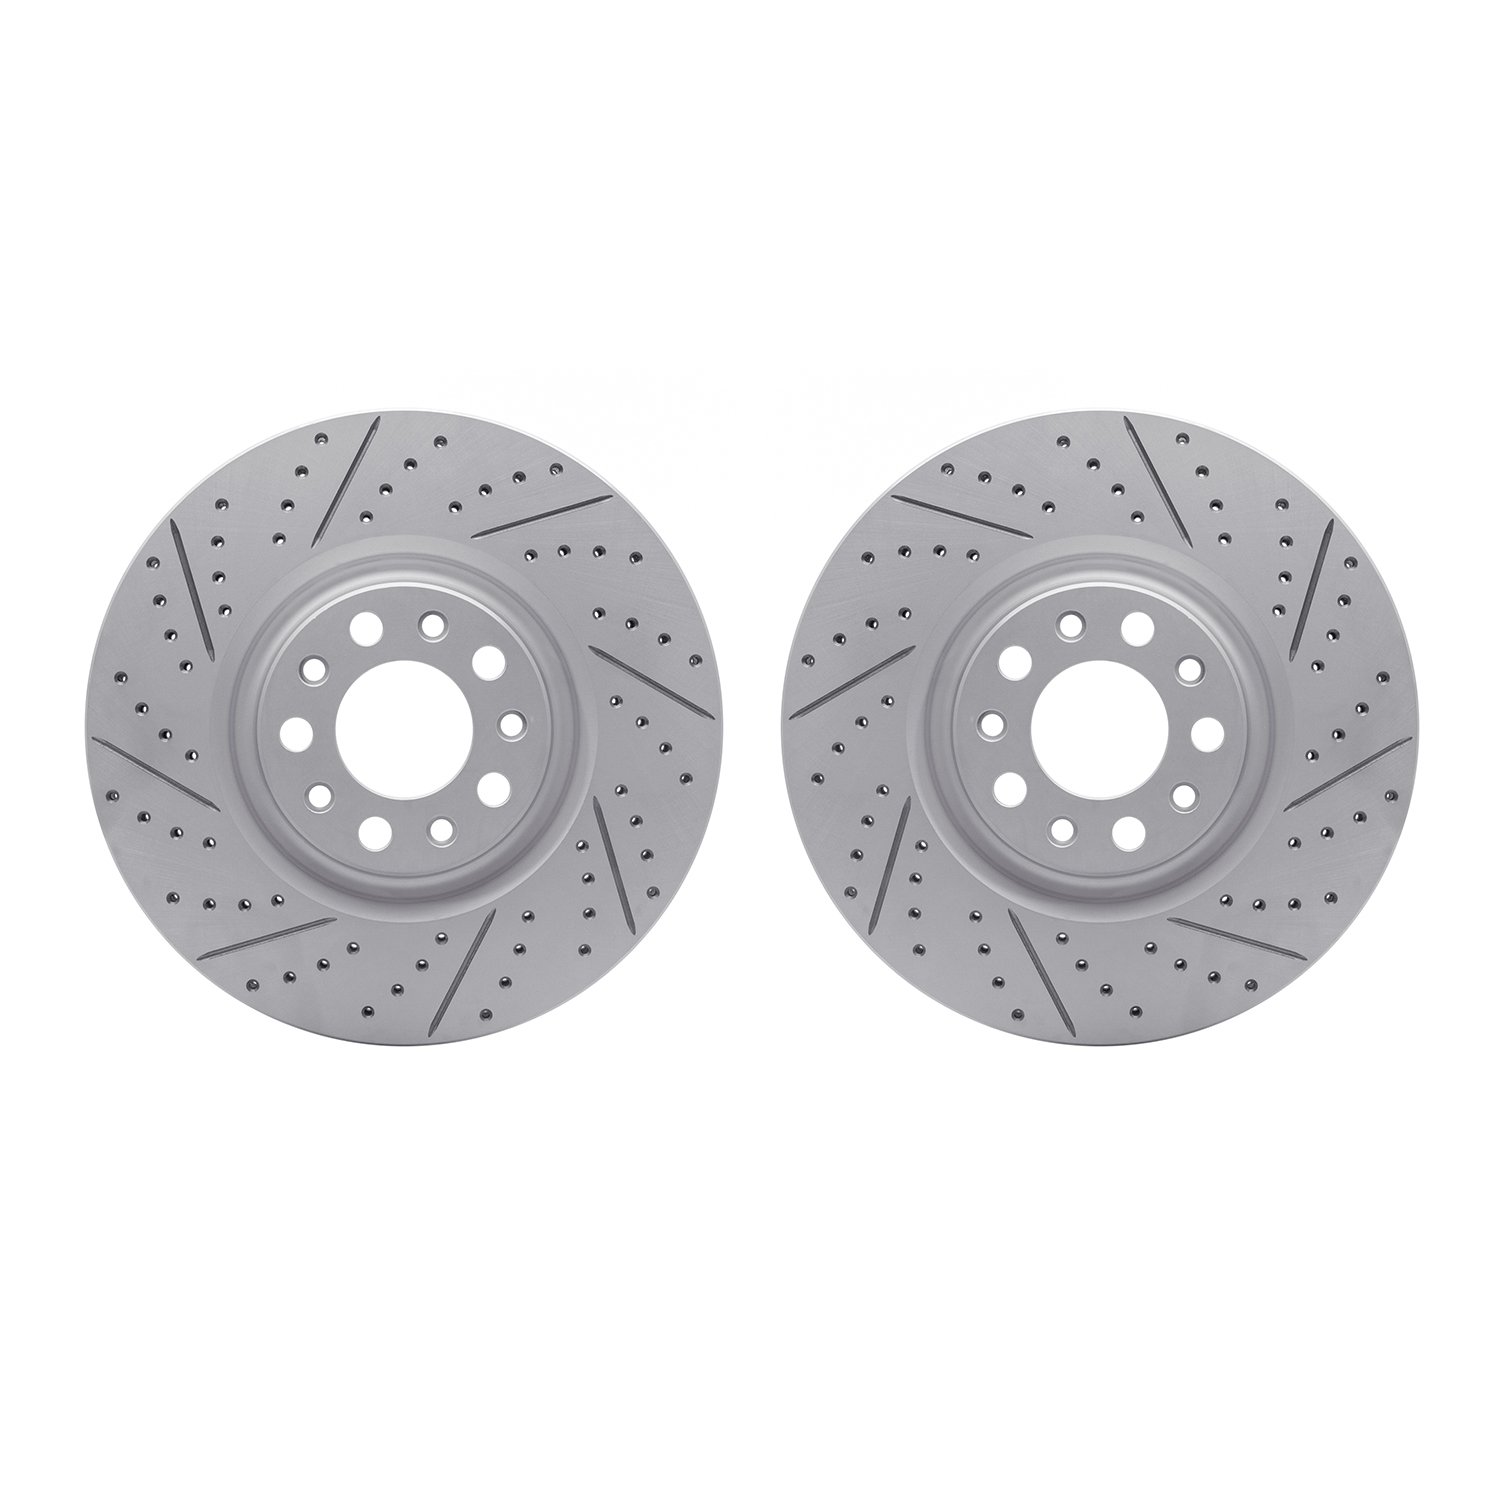 2002-16002 Geoperformance Drilled/Slotted Brake Rotors, 2017-2021 Alfa Romeo, Position: Front